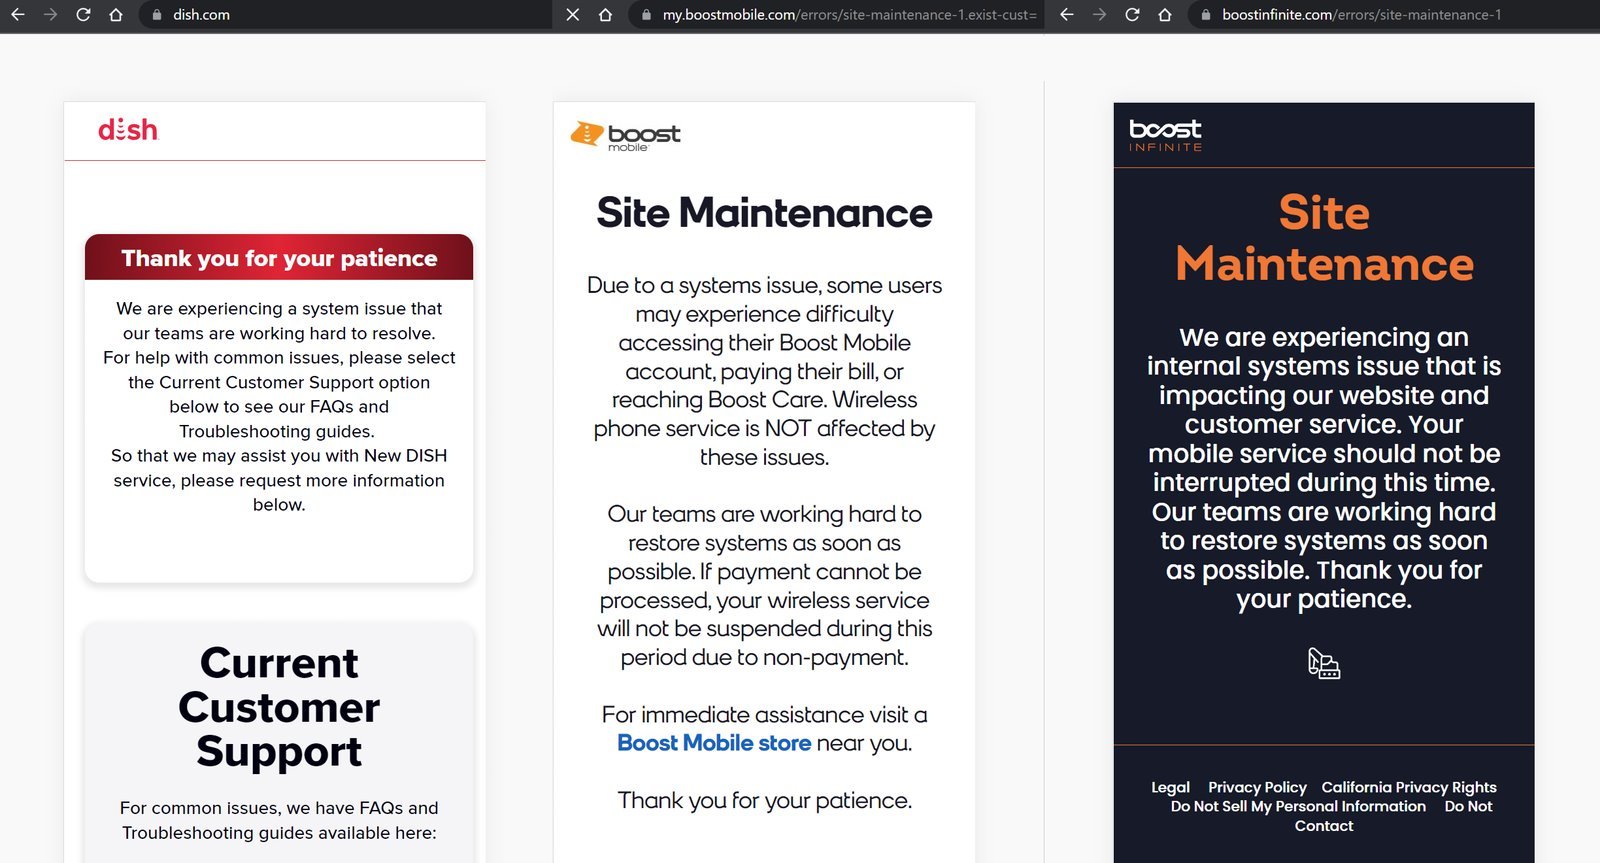 DISH And Boost Mobile Websites Still Partially Down And Redirecting To Error Pages After Cyberattack